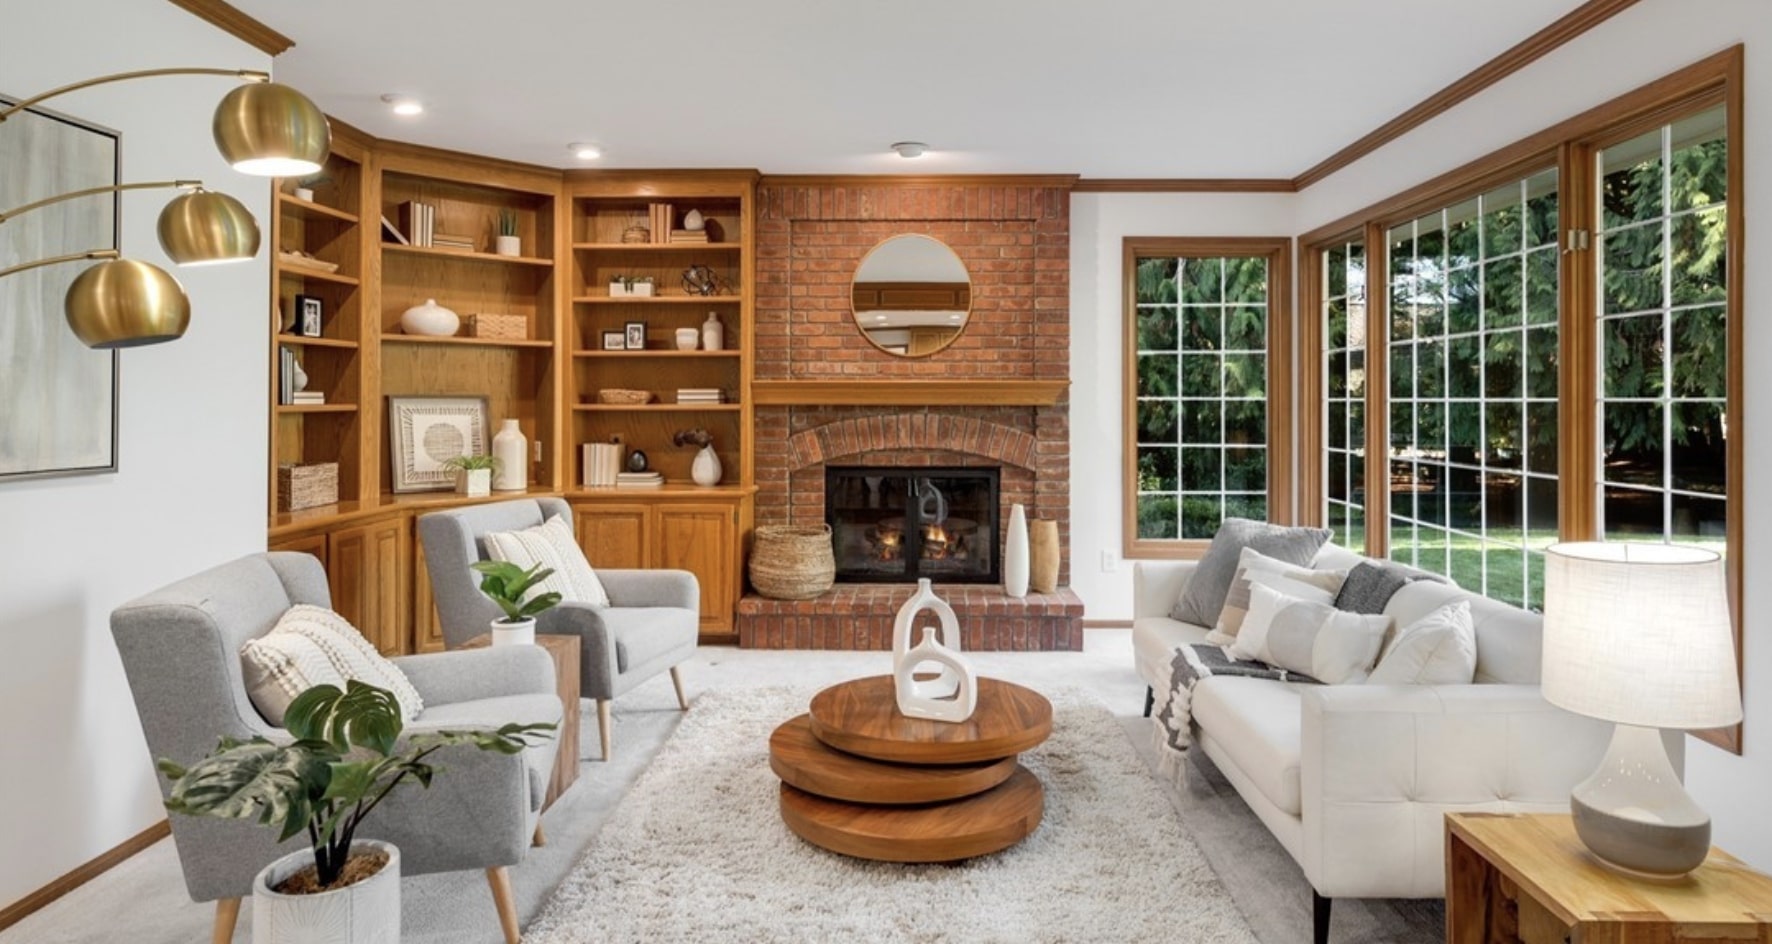 Modern earthy style accentuates this cozy family room